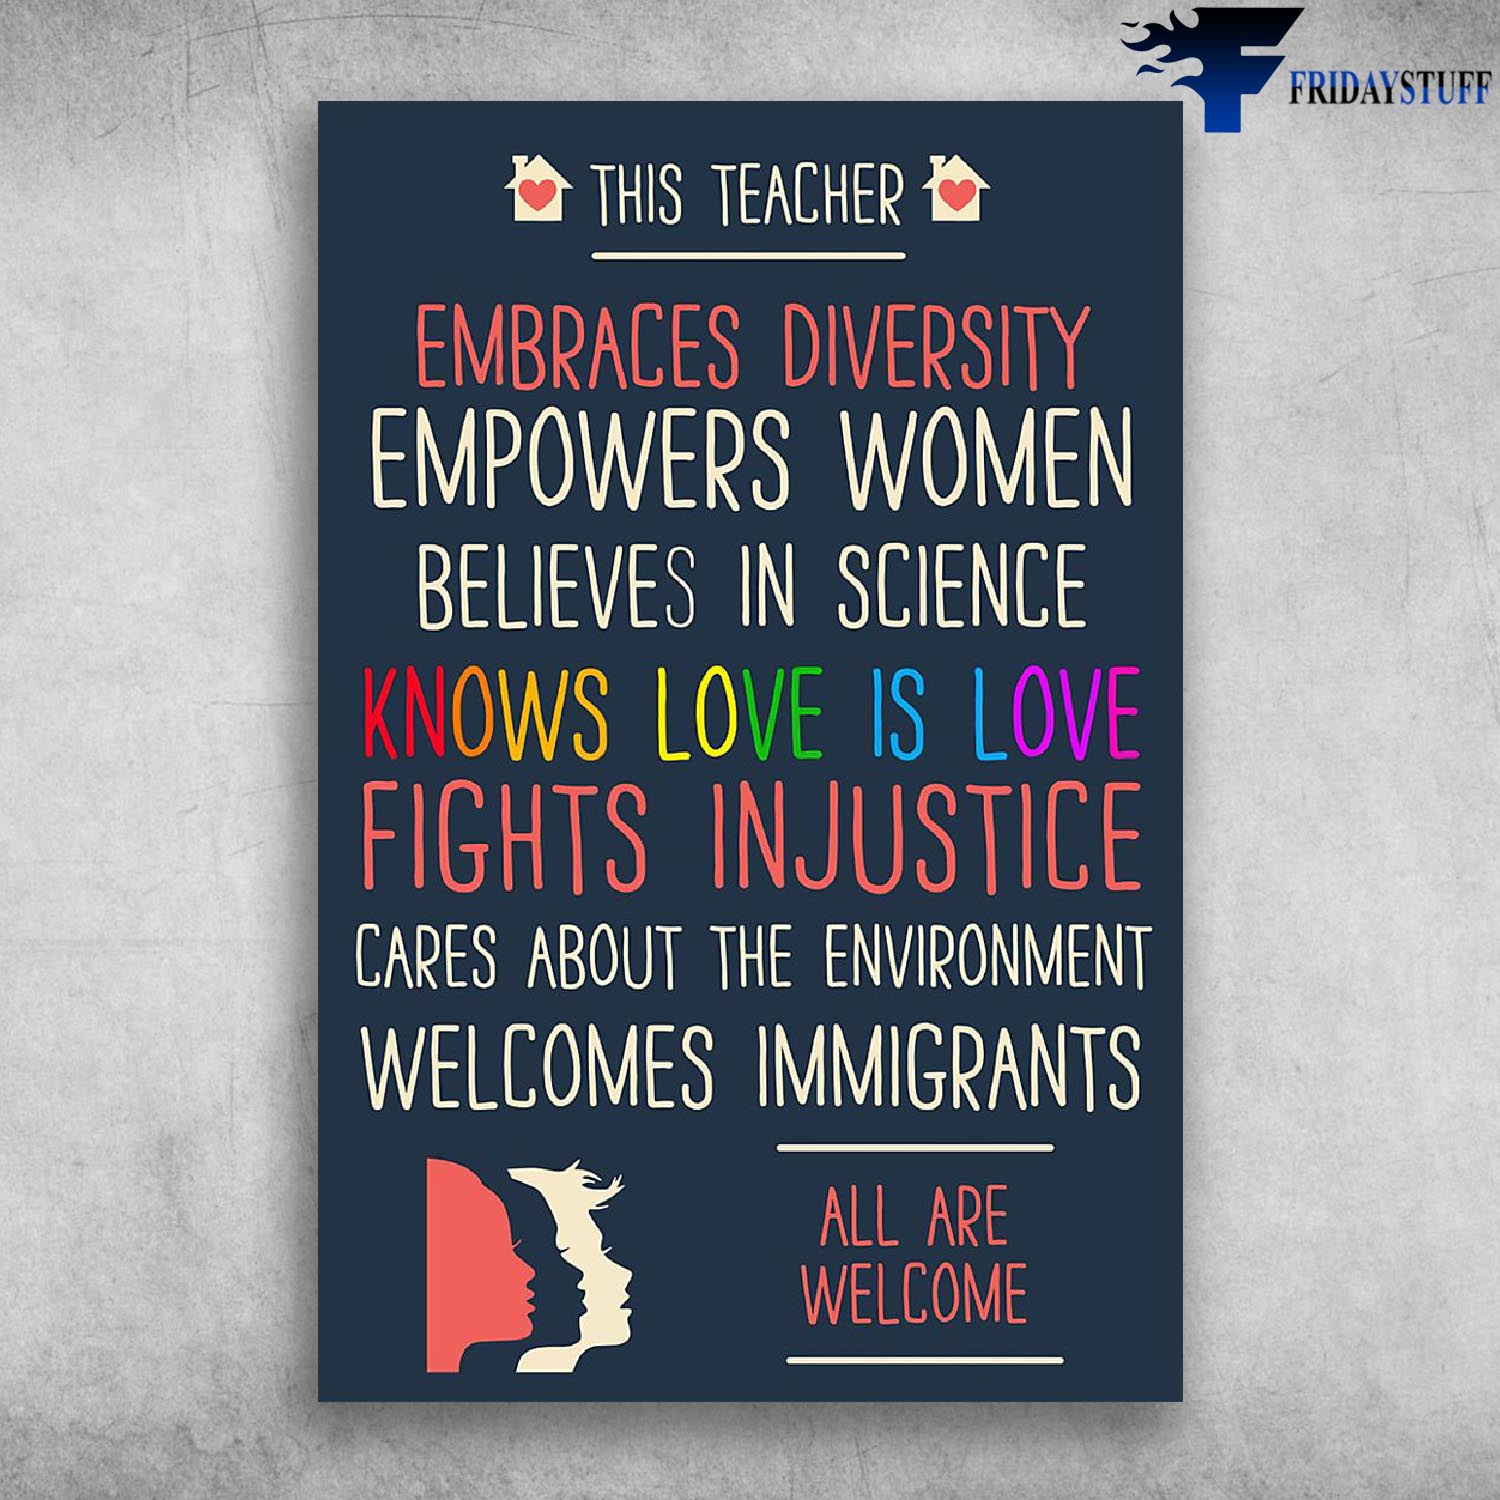 This Teacher Embraces Diversity Empowers Women Believes In Science Knows Love is Love